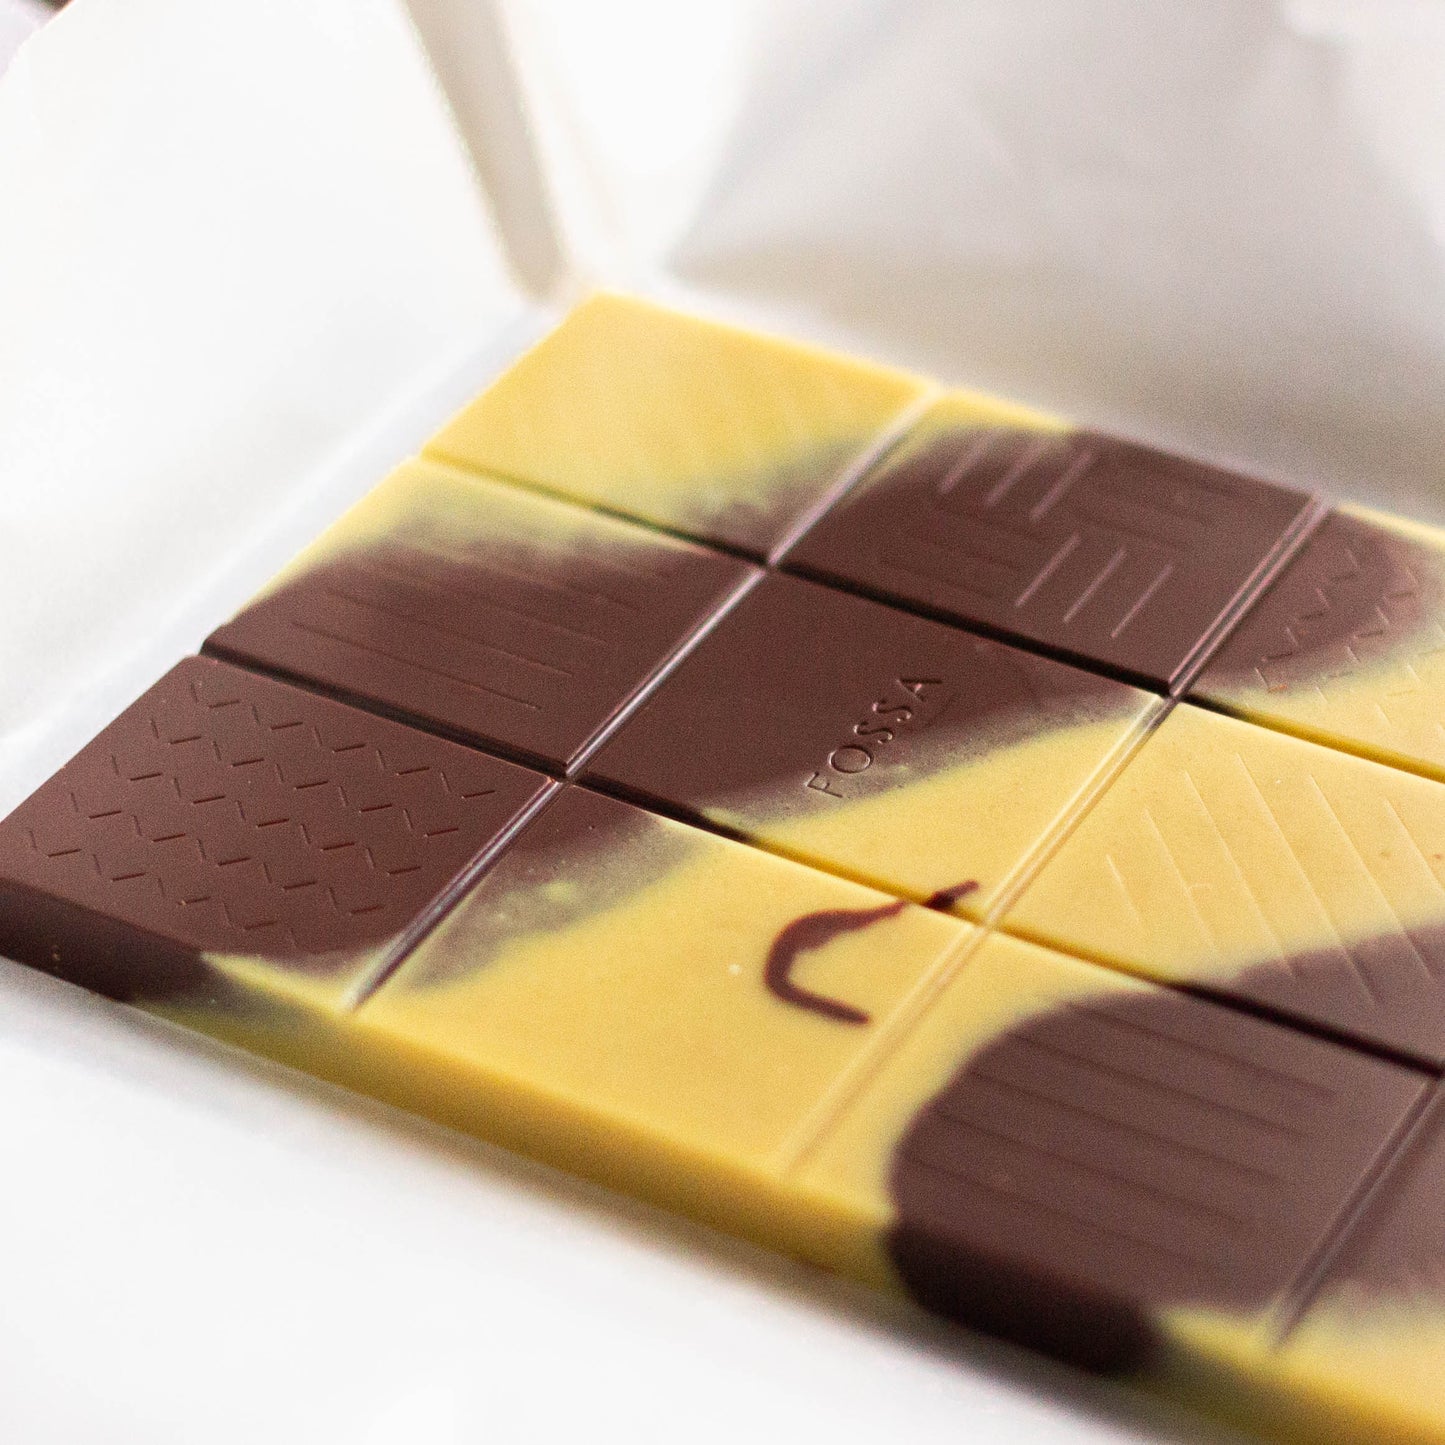 Bee Pollen Chocolate (Exclusive collaboration with Fossa Chocolate)